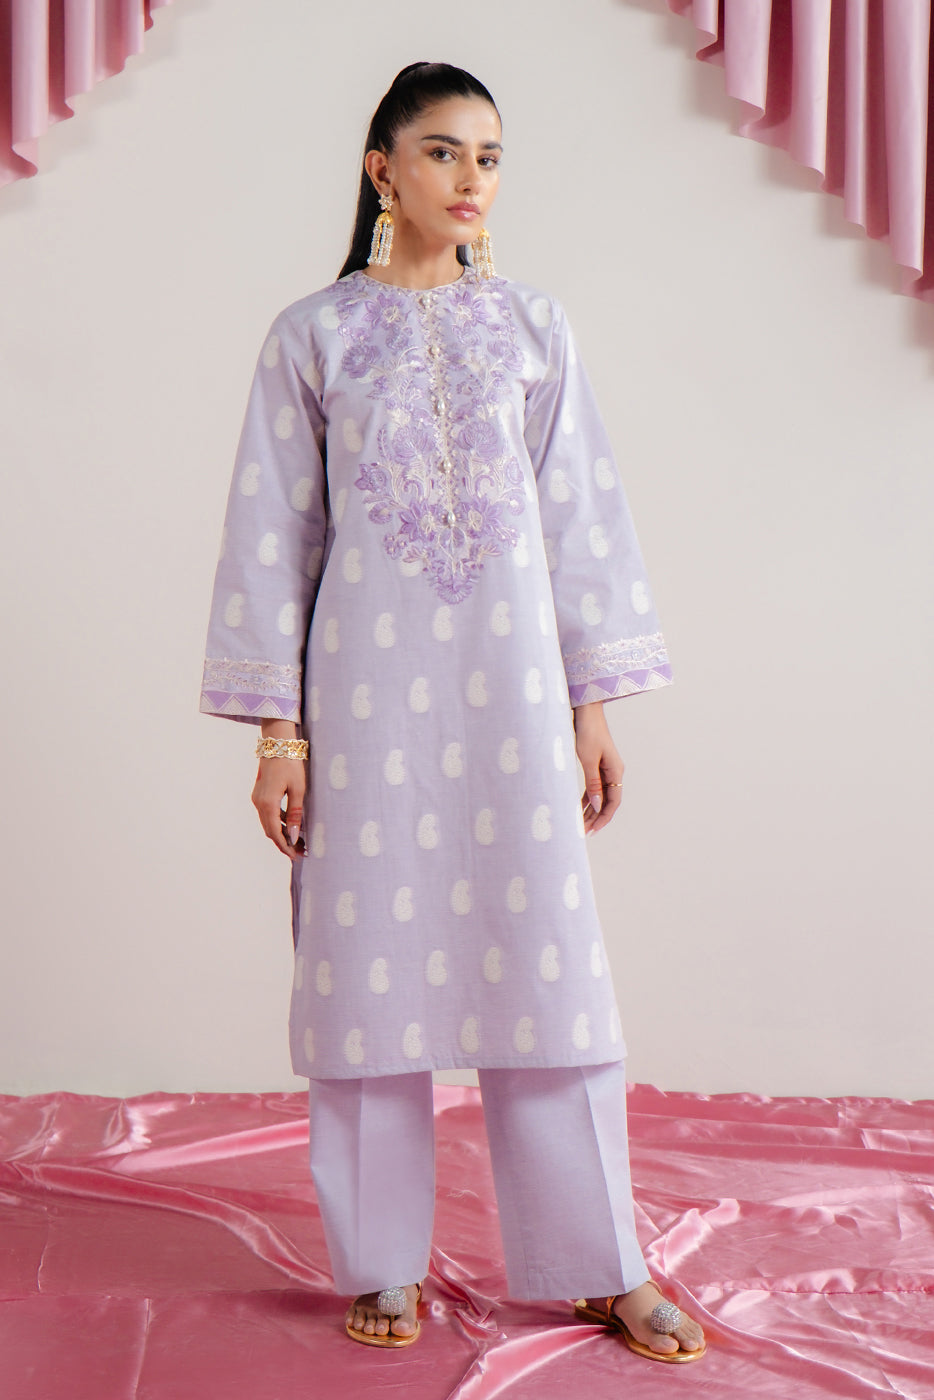 2 PIECE EMBROIDERED TWO TONE JACQUARD SUIT-LAVENDER DEW (UNSTITCHED)